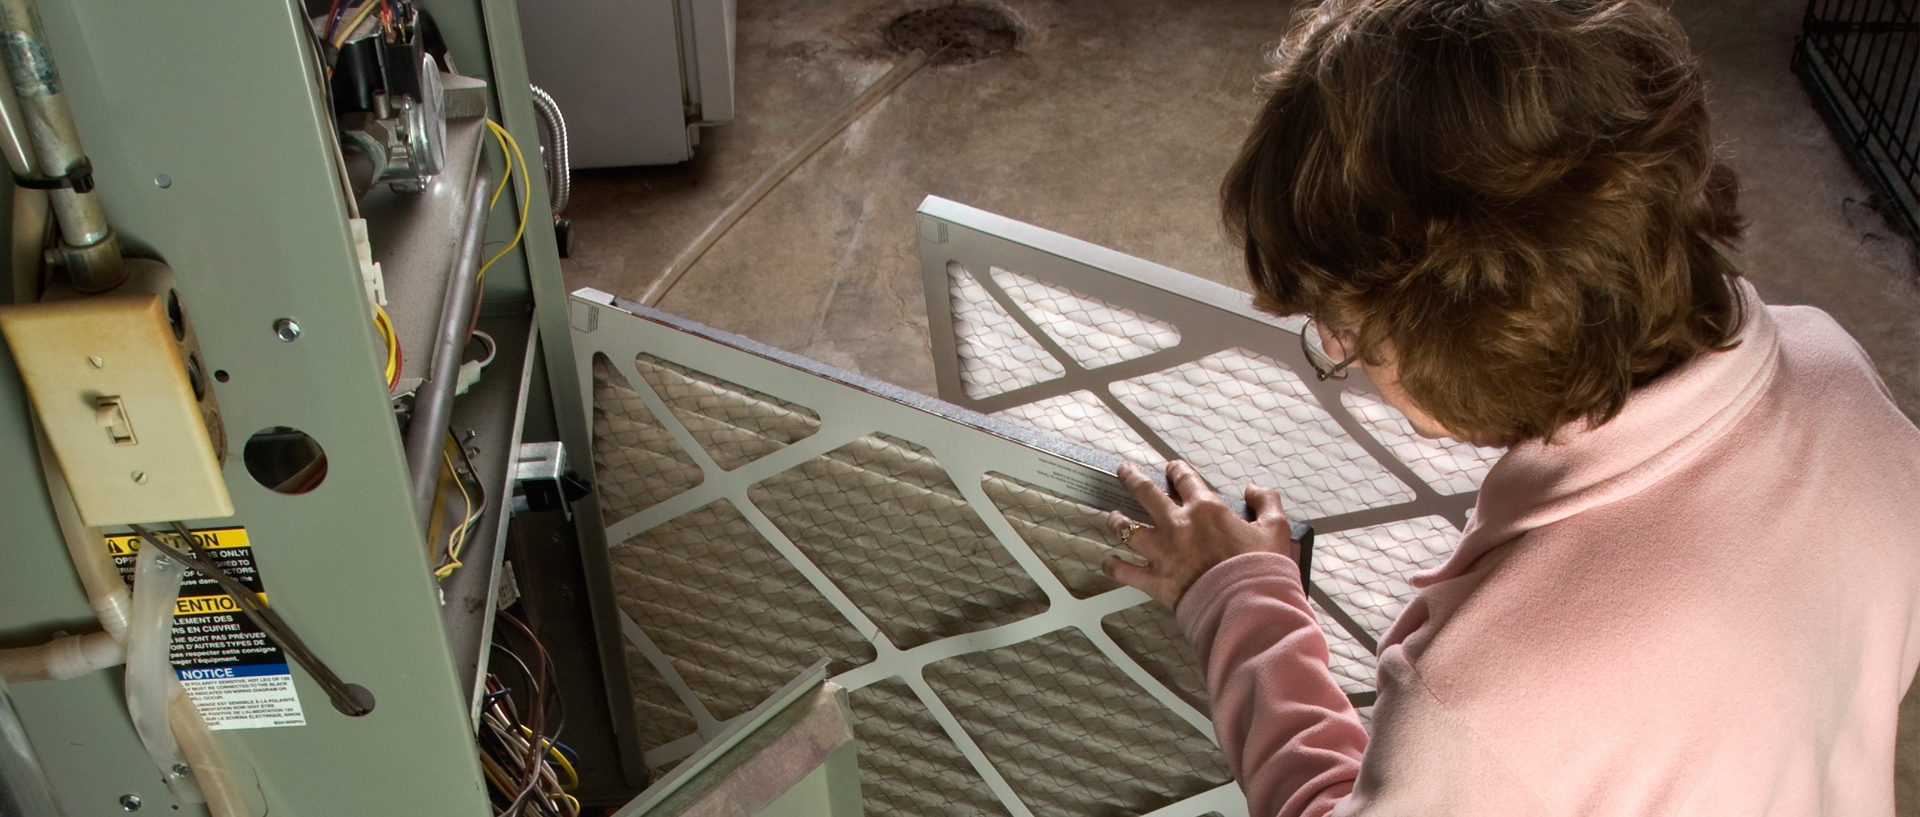 How to Replace Furnace Filters Consumer Reports